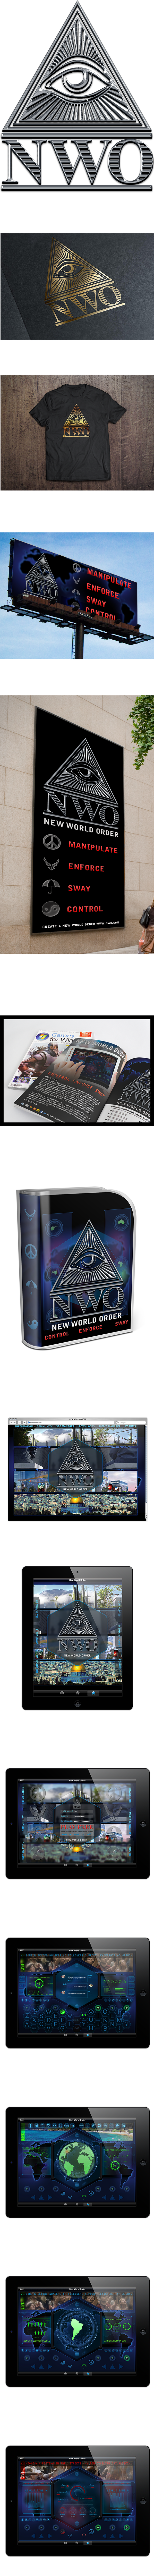 nWo New World Order social networking manager